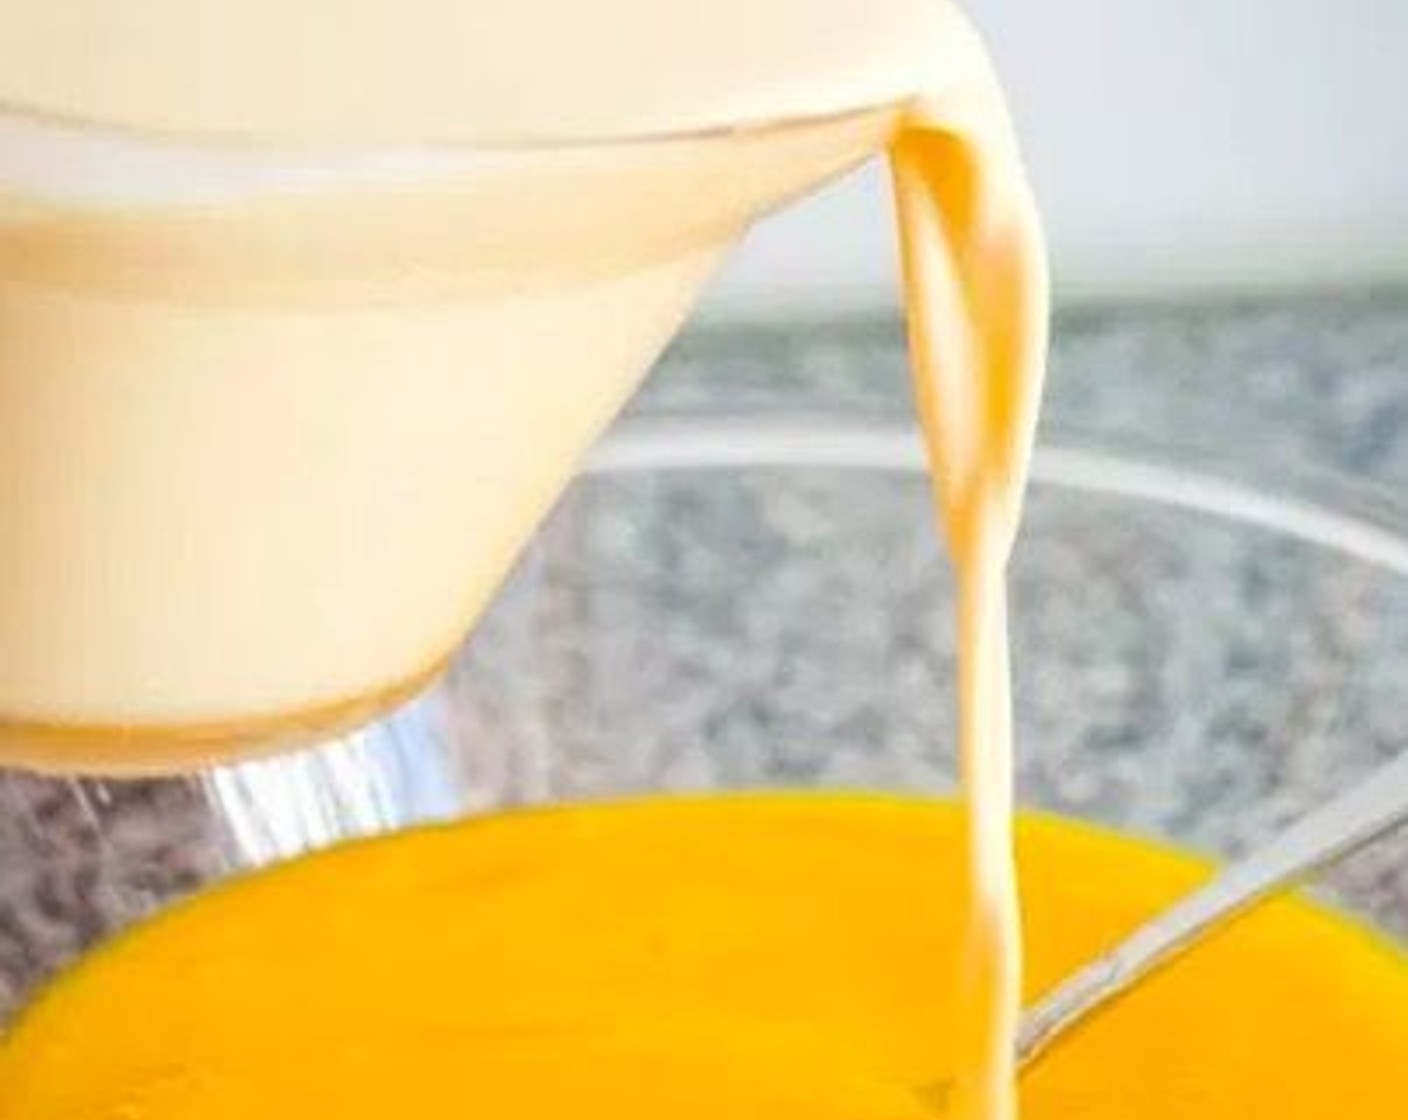 step 2 Add Evaporated Milk (1 3/4 cups) to the mango puree. Stir until well combined.